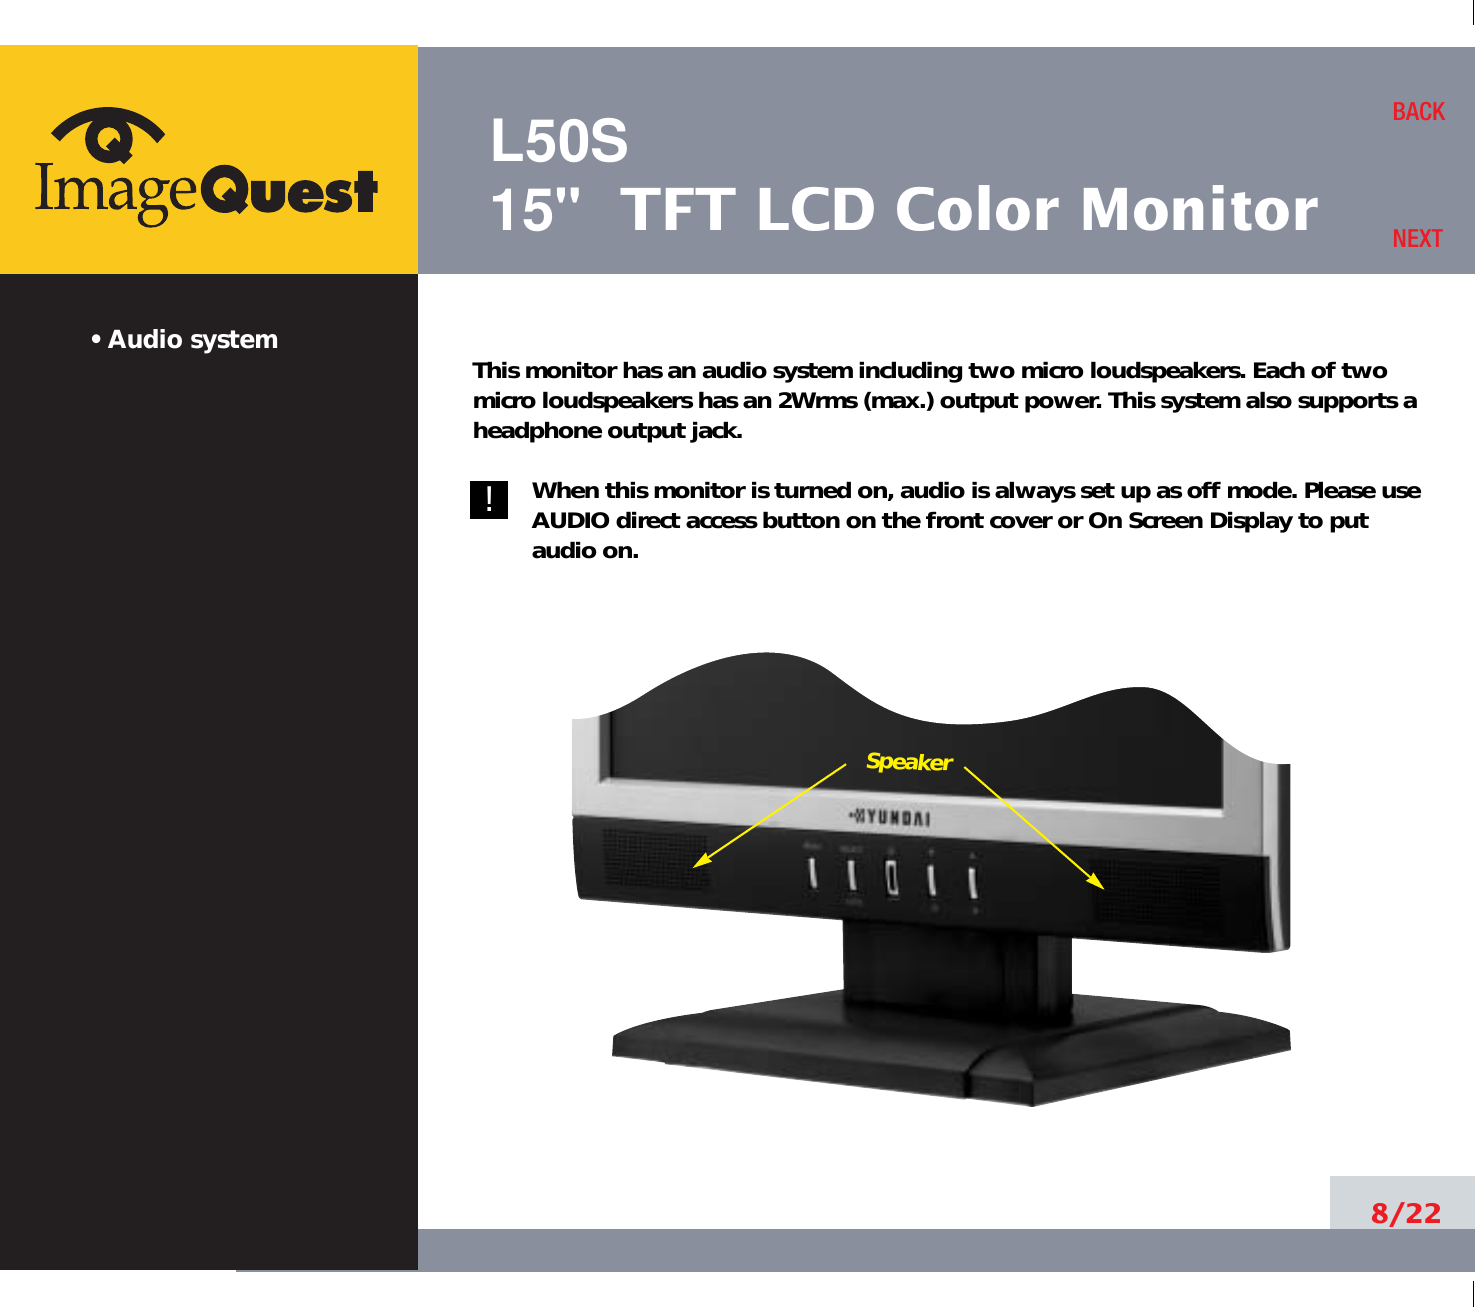 L50S15&quot; TFT LCD Color Monitor• Audio system8/22BACKNEXT!!This monitor has an audio system including two micro loudspeakers. Each of twomicro loudspeakers has an 2Wrms (max.) output power. This system also supports aheadphone output jack.When this monitor is turned on, audio is always set up as off mode. Please useAUDIO direct access button on the front cover or On Screen Display to putaudio on. Speaker